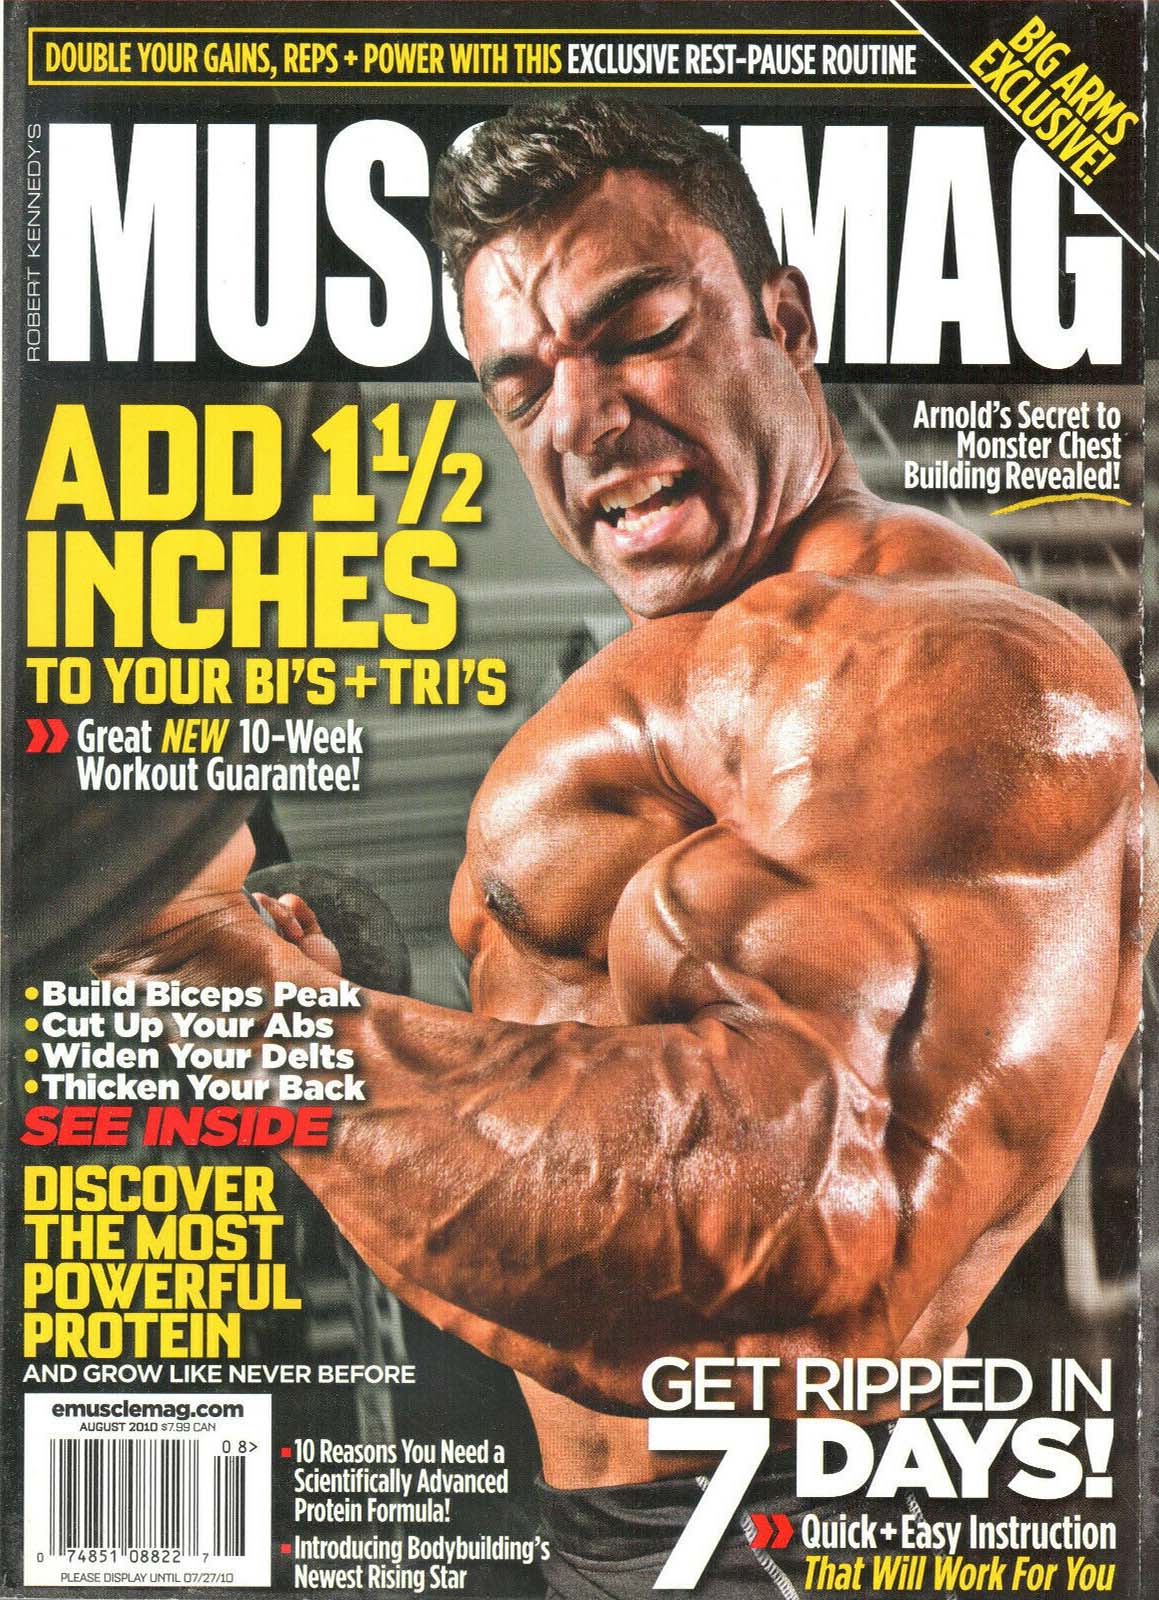 Muscle Mag August 2010 magazine back issue Muscle Mag magizine back copy Muscle Mag August 2010 Bodybuilding and Fitness Magazine Back Issue Published by Canadian Robert Kennedy and Founded in 1974. Double Your Gains, Reps + Power With This Exclusive Rest - Pause Routine.